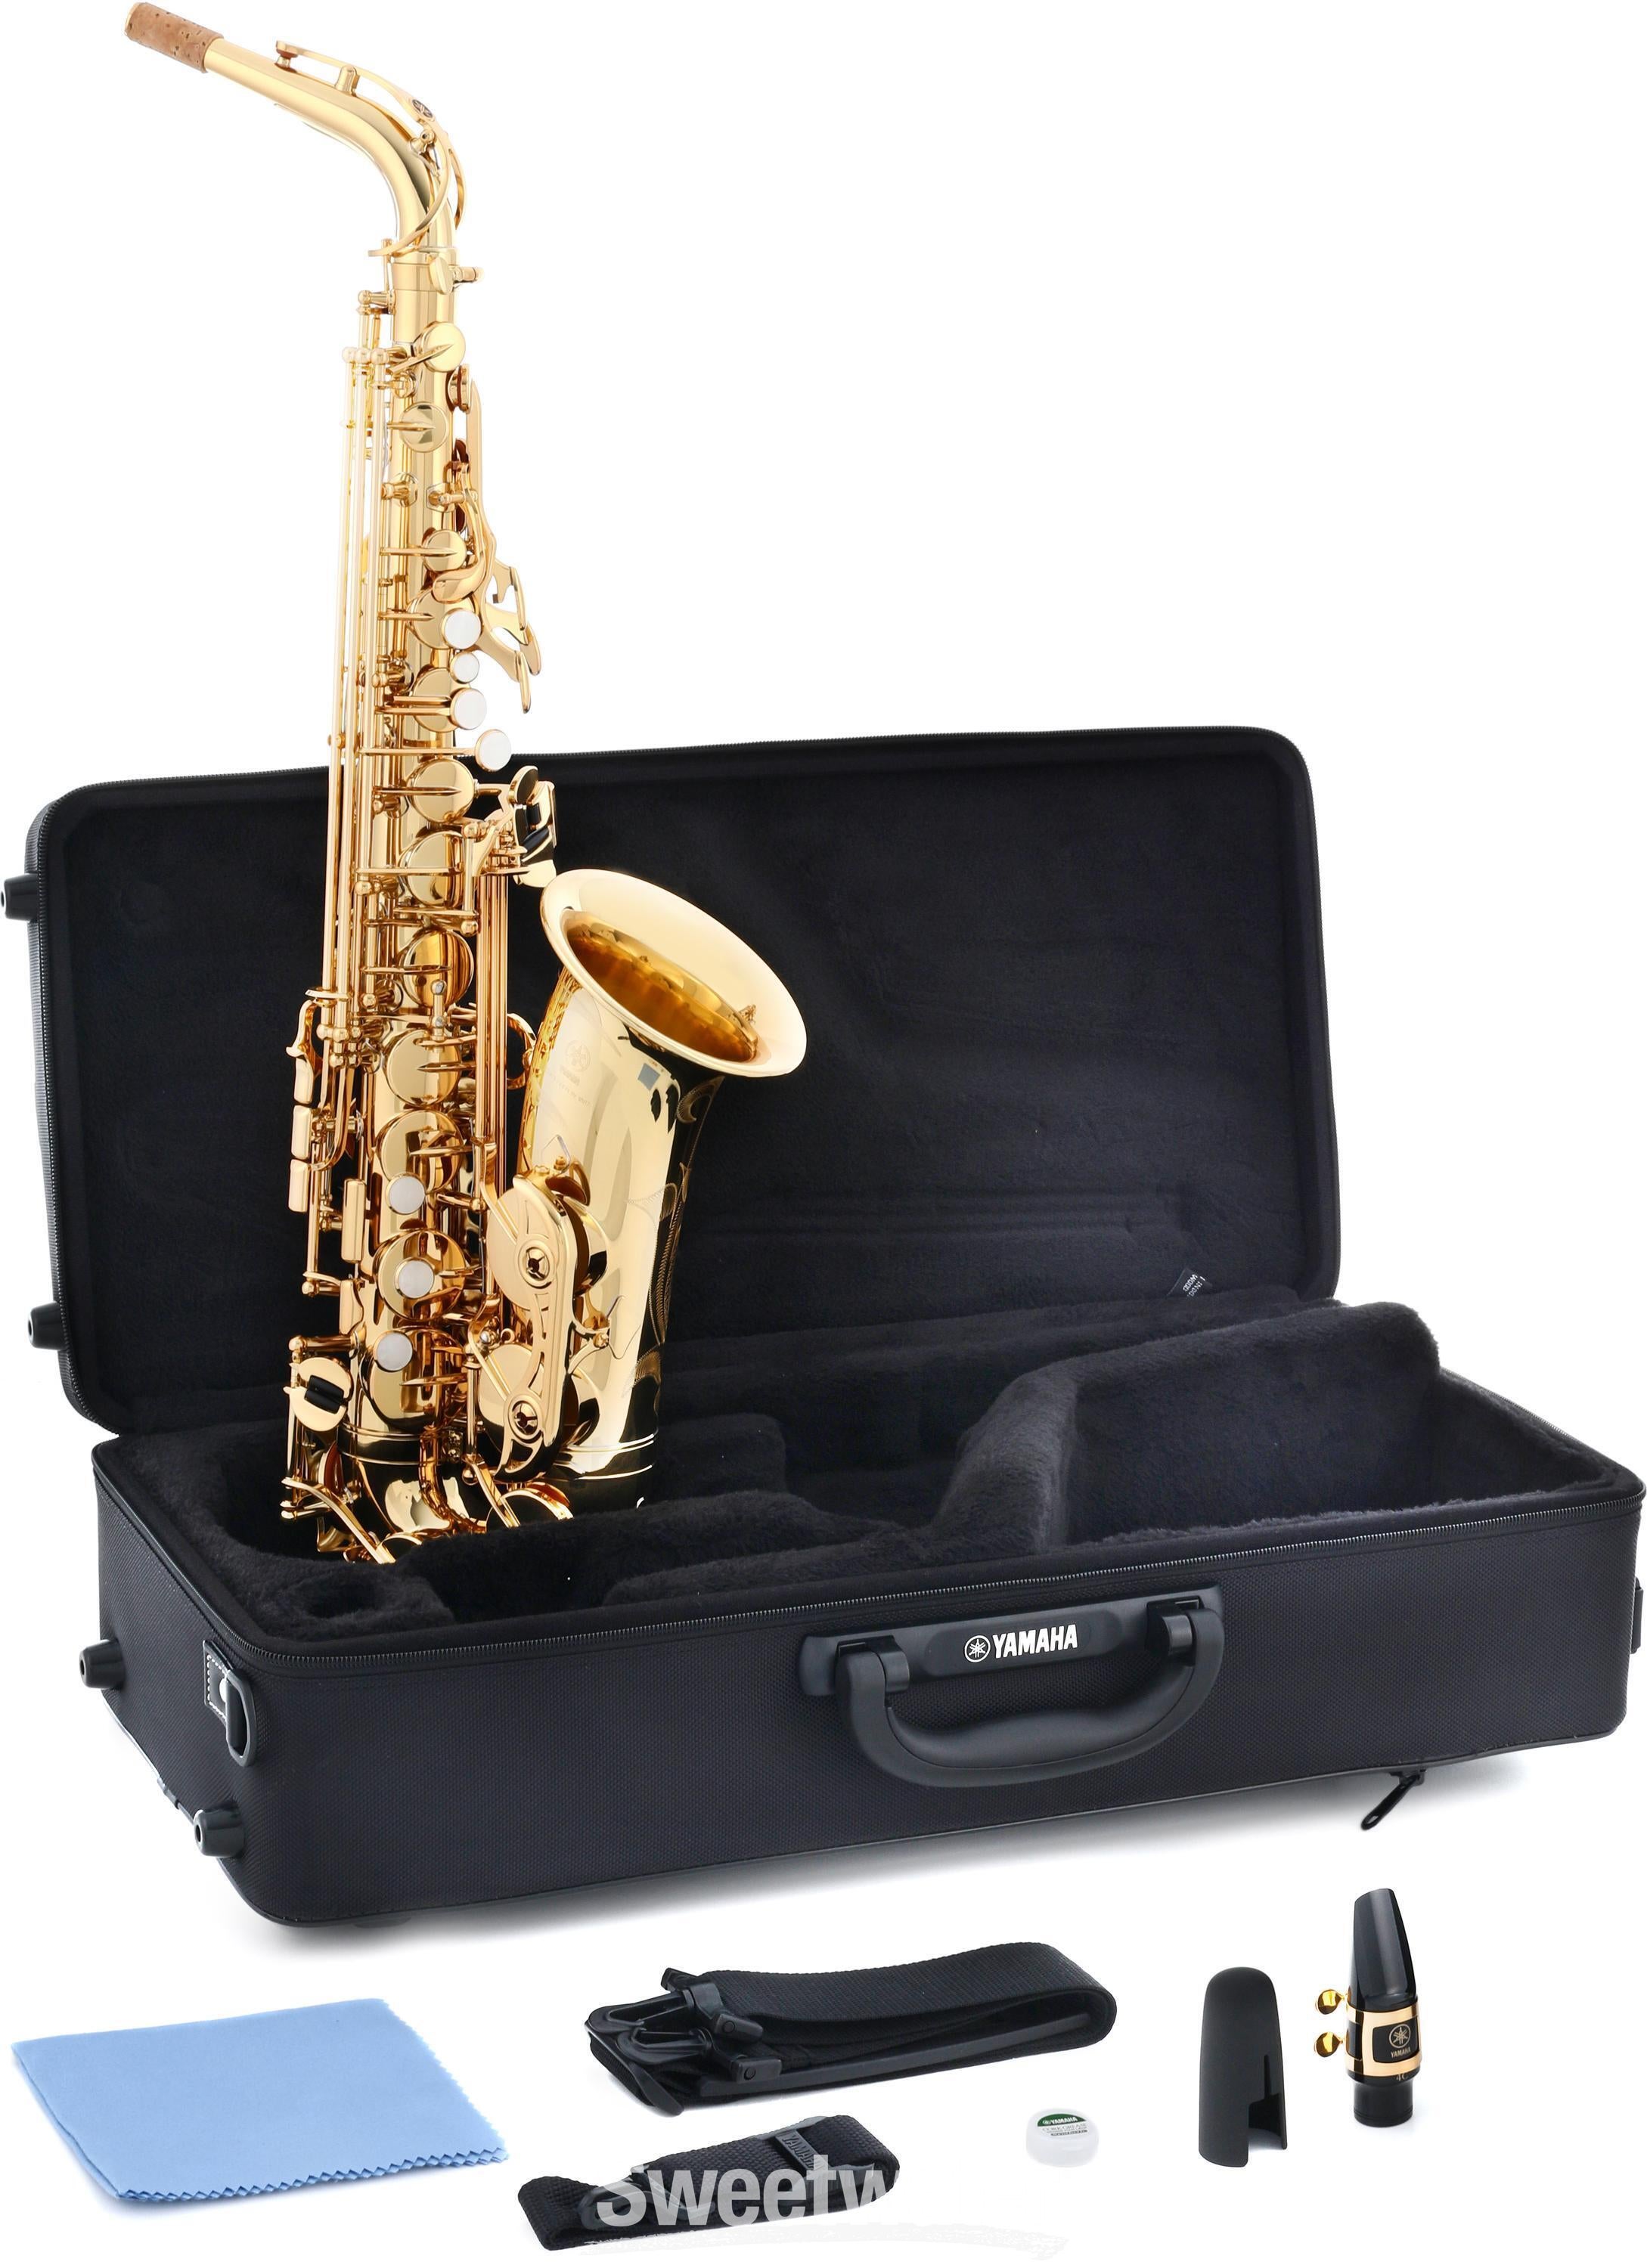 Yamaha YAS-480 Intermediate Alto Saxophone - Gold Lacquer | Sweetwater